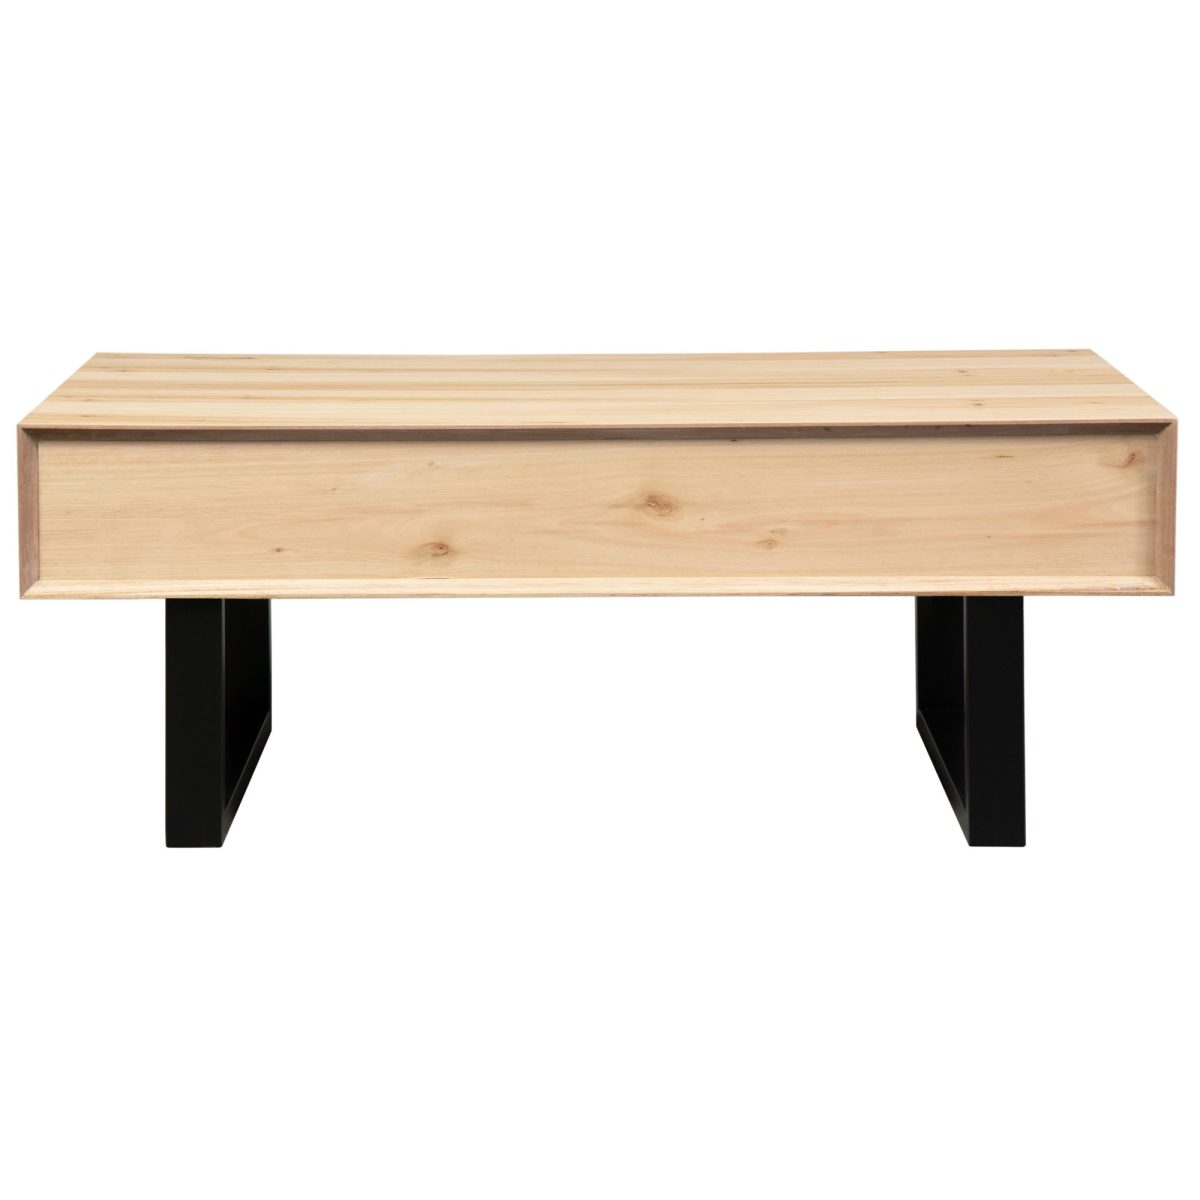 Aconite Coffee Table 120cm 2 Drawers Solid Messmate Timber Wood – Natural